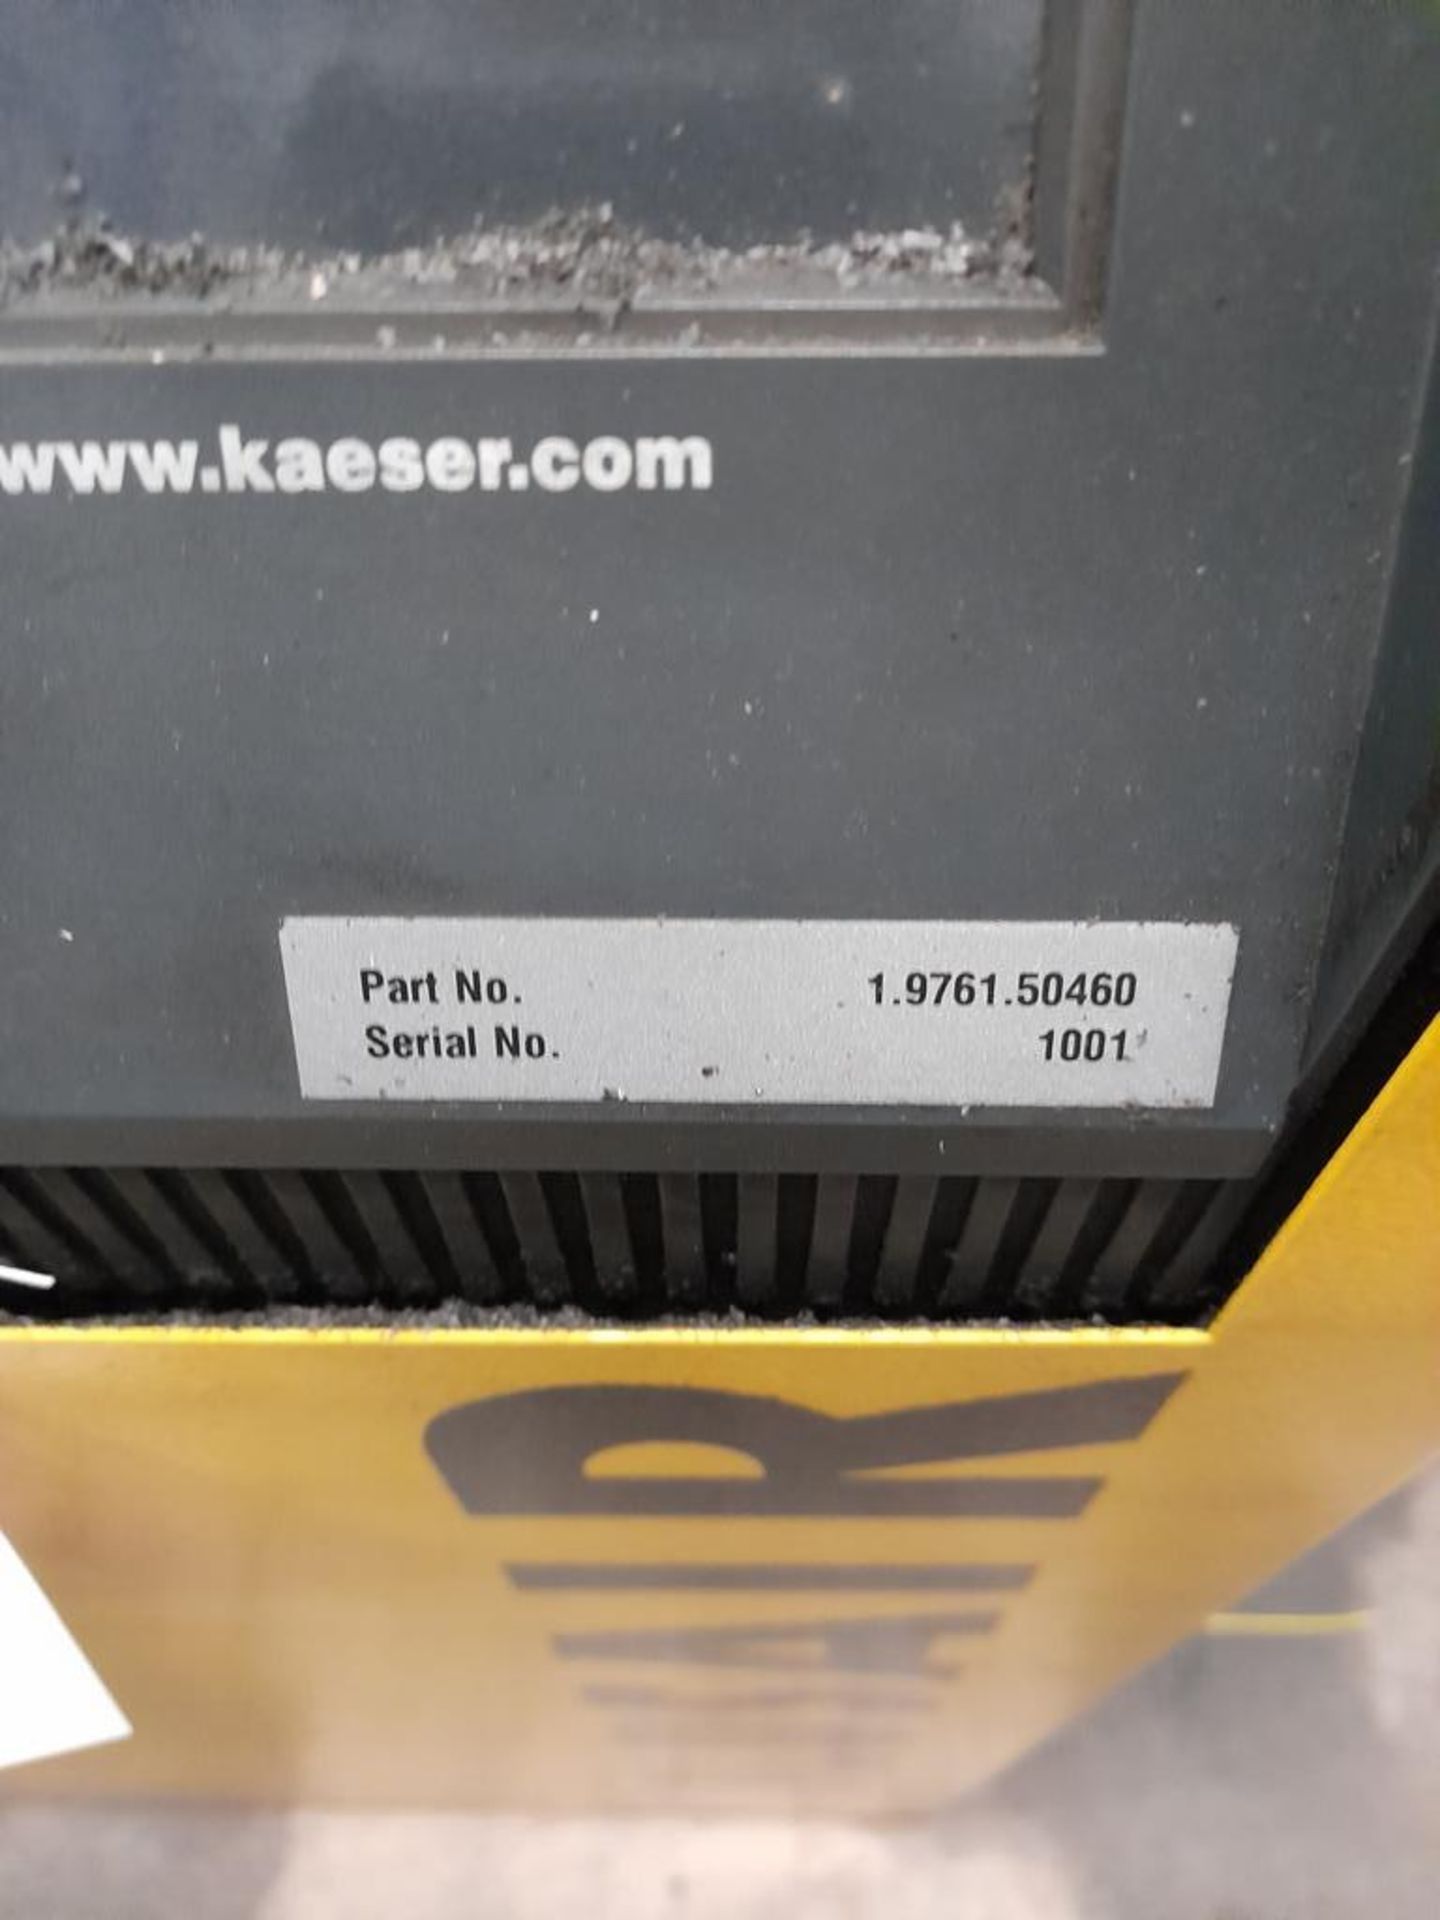 Kaeser HPC SK19 packaged air compressor, Serial no. 3902. NB: The purchaser must ensure this item is - Image 3 of 3